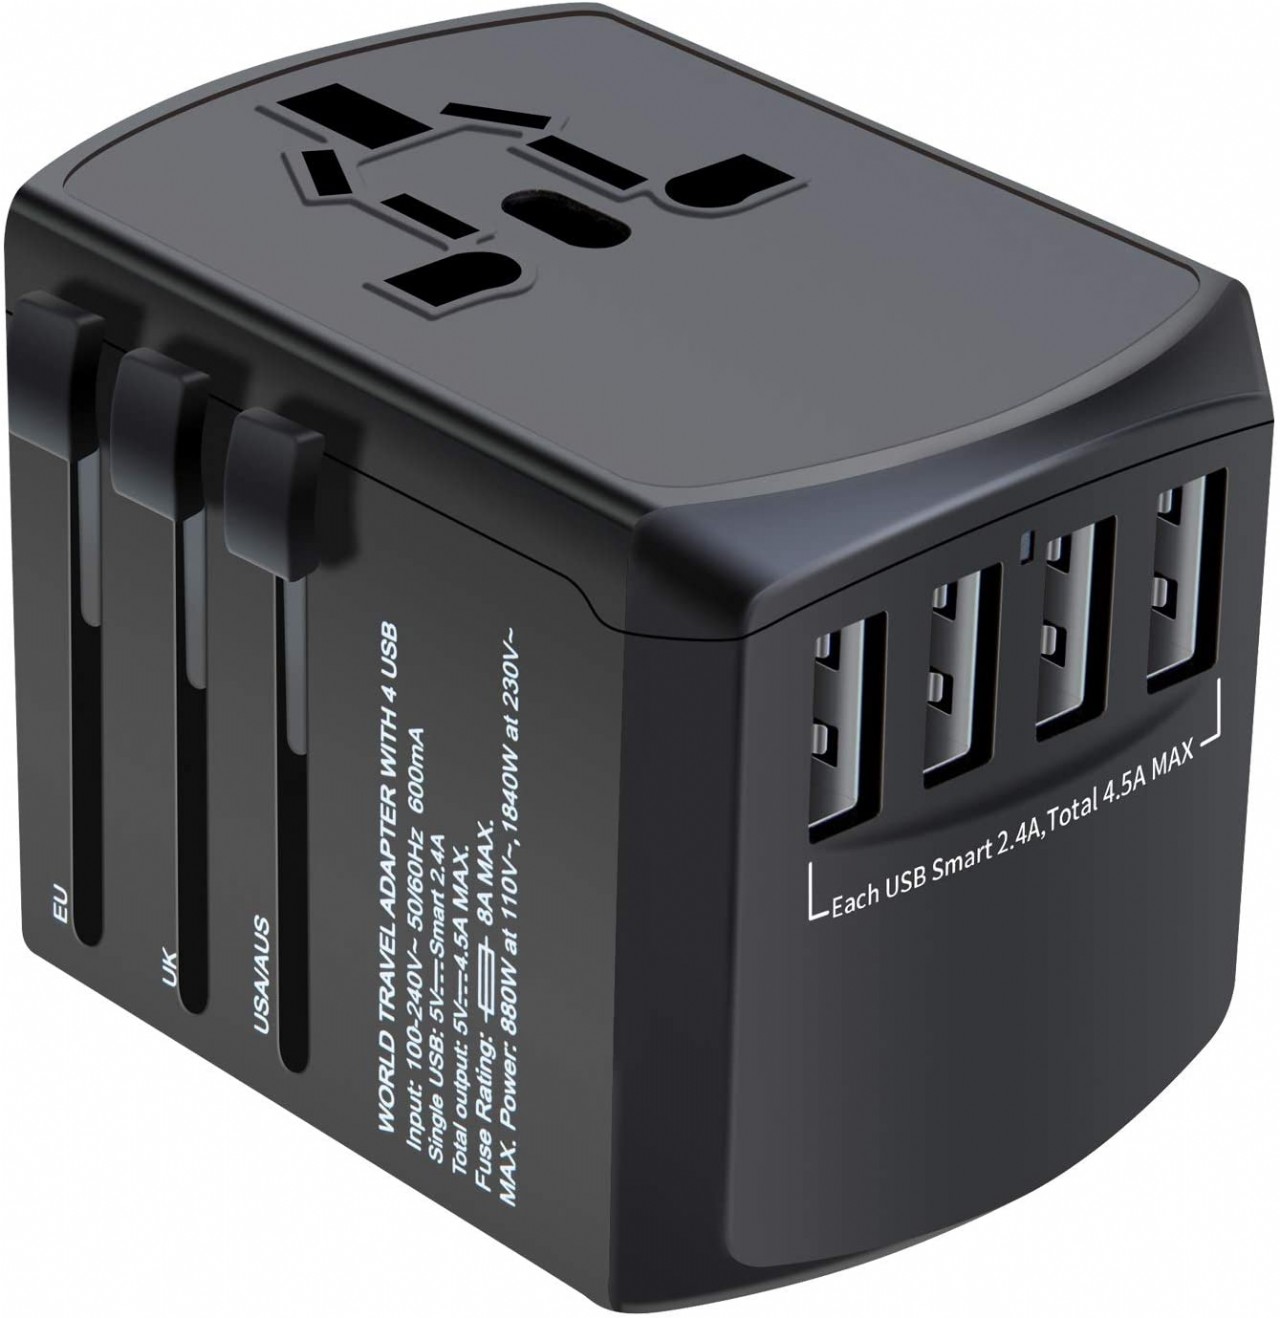 Usb Charger Brick 2pack Multi 3 Port Travel Usb Wall Charger 3 1a Usb Plug Power Adapter Phone